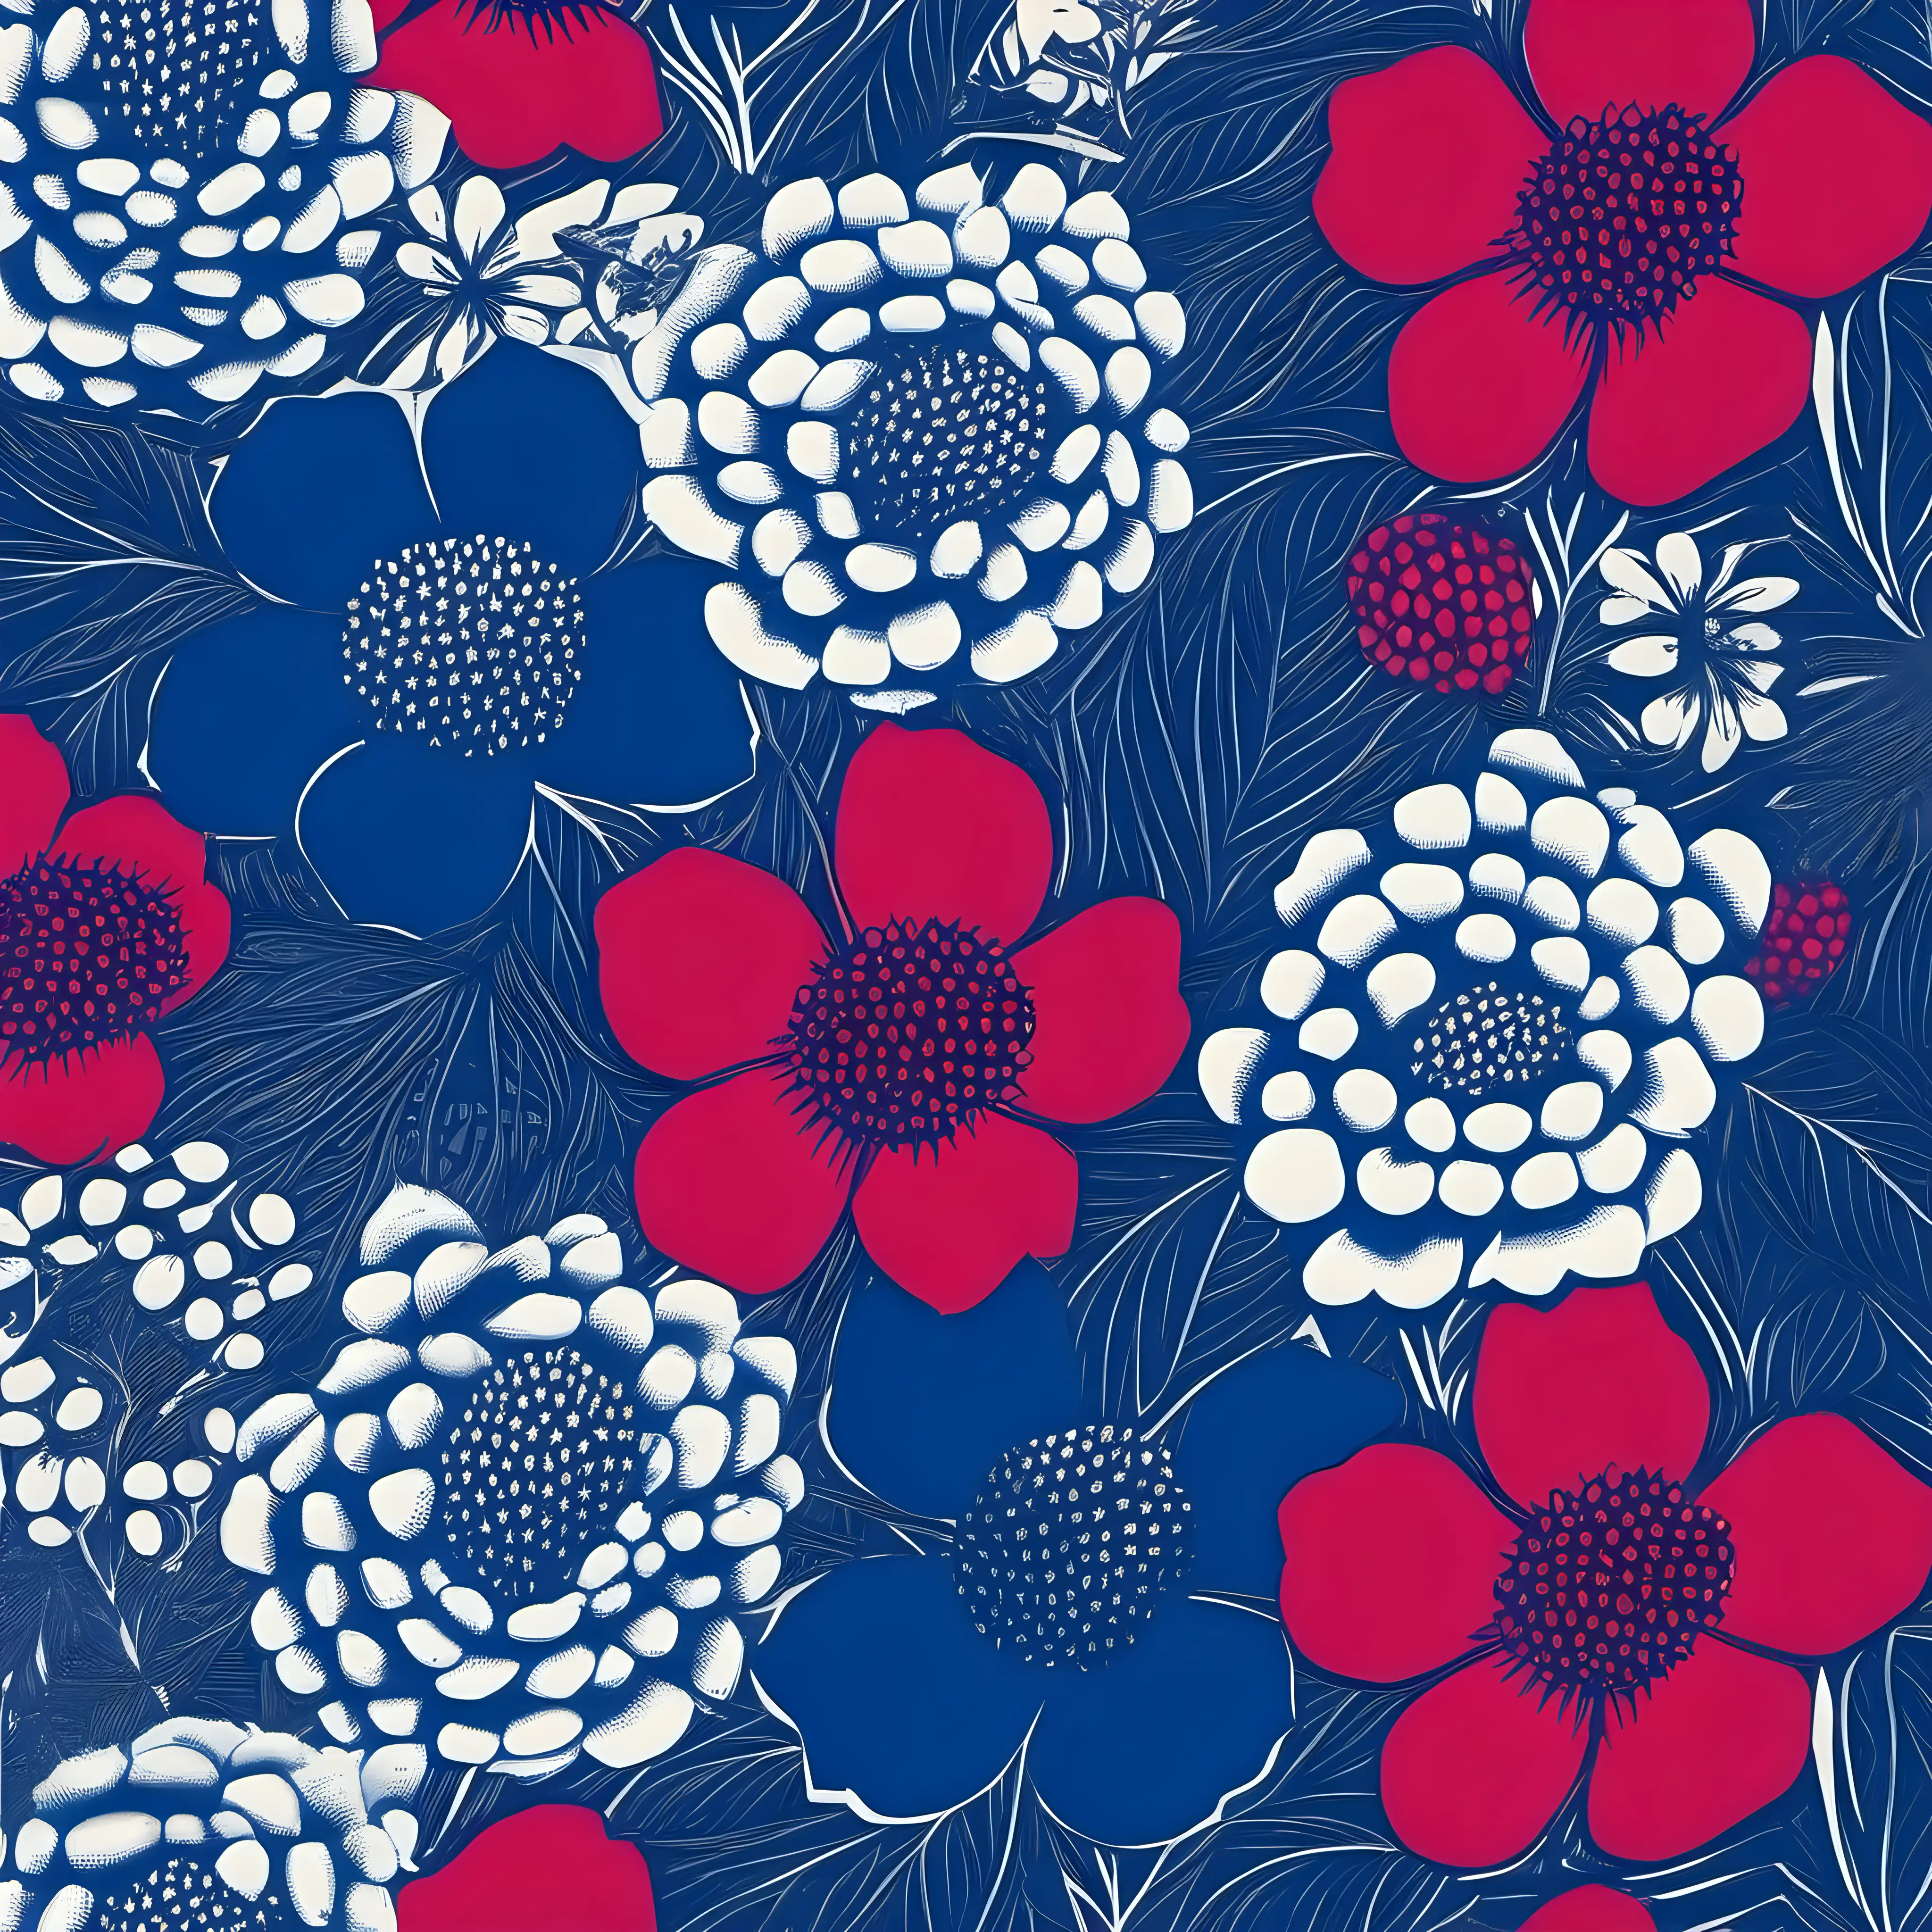 /imagine prompt HAND PRINTED, MANY SMALL RASBERRY AND BLUEBERRY FLOWERS,RED, BLUE, BOTANIC ELEGANCE, ANDY WARHOL INSPIRED